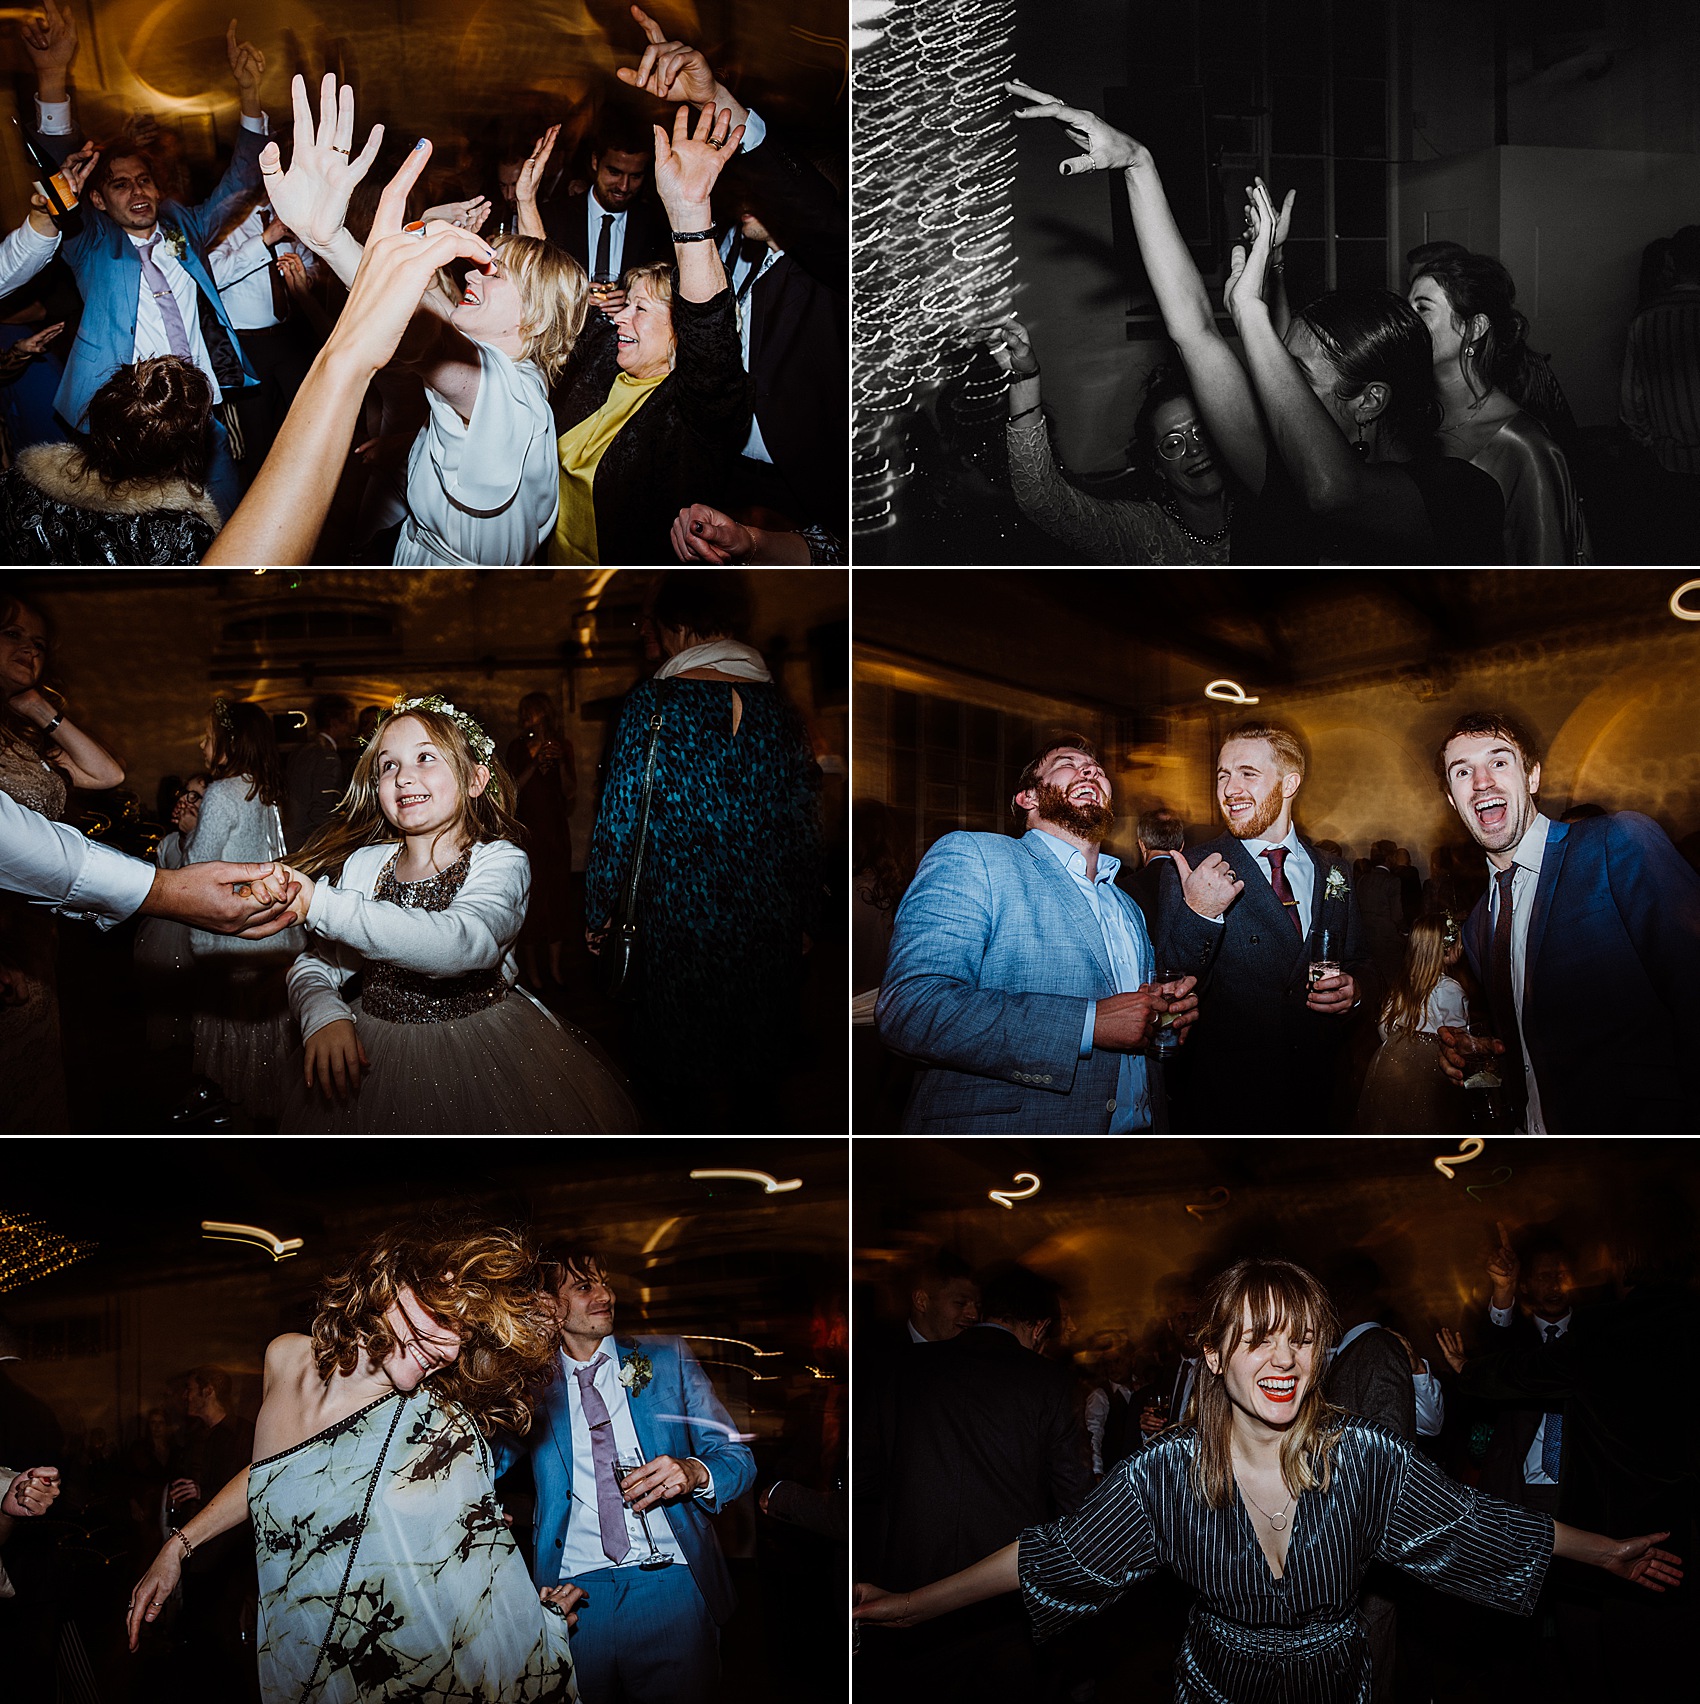 New York s loft party inspired wedding  - A 1970s Disco + New York Loft Party Inspired Winter Wedding at London Docklands